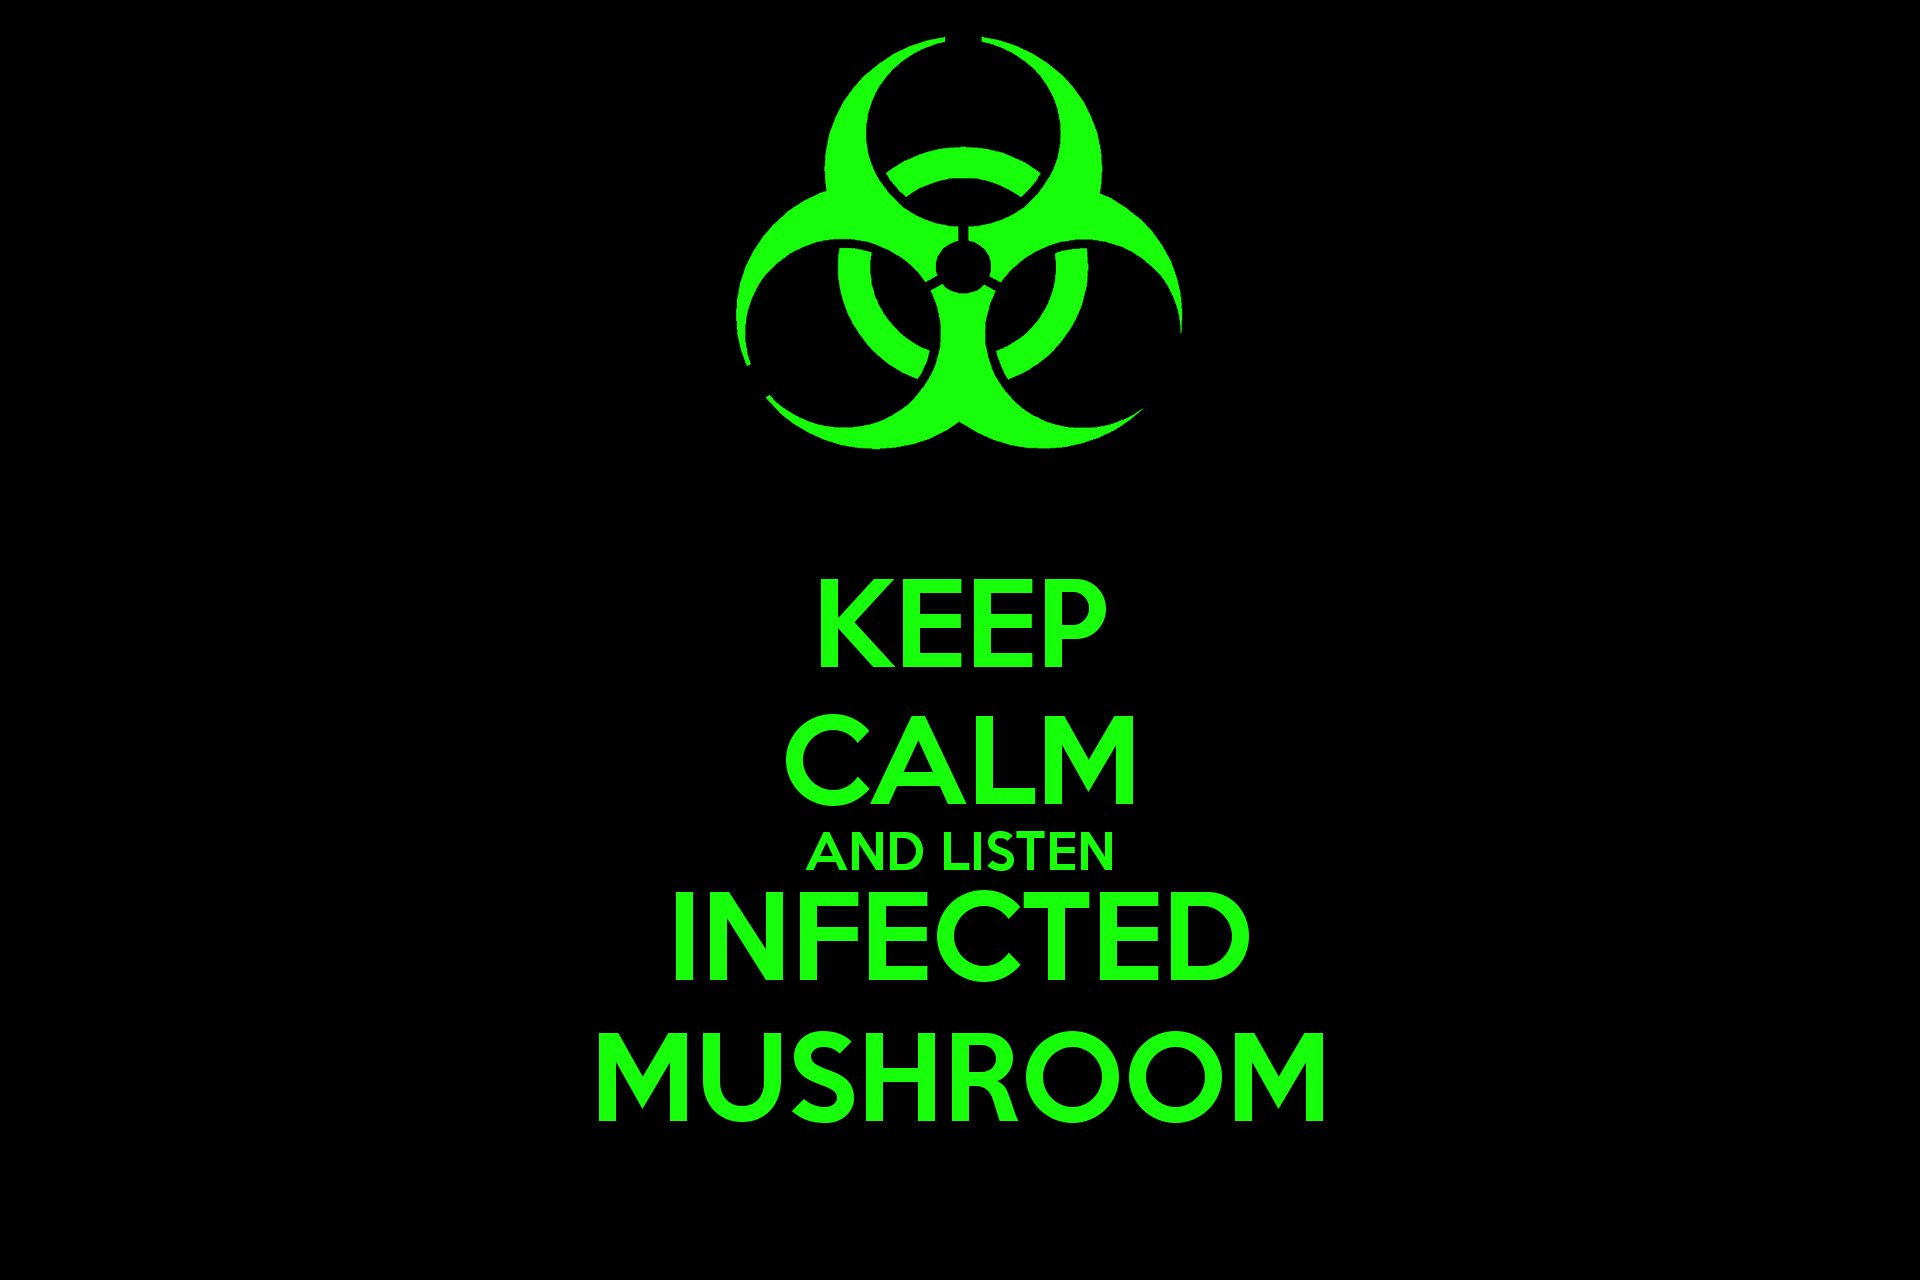 infected, Mushroom, Psychedelic, Trance, Electro, House, Electronica, Electronic, Rock, Industrial, Disc, Jockey, Keep, Calm, Poster Wallpaper